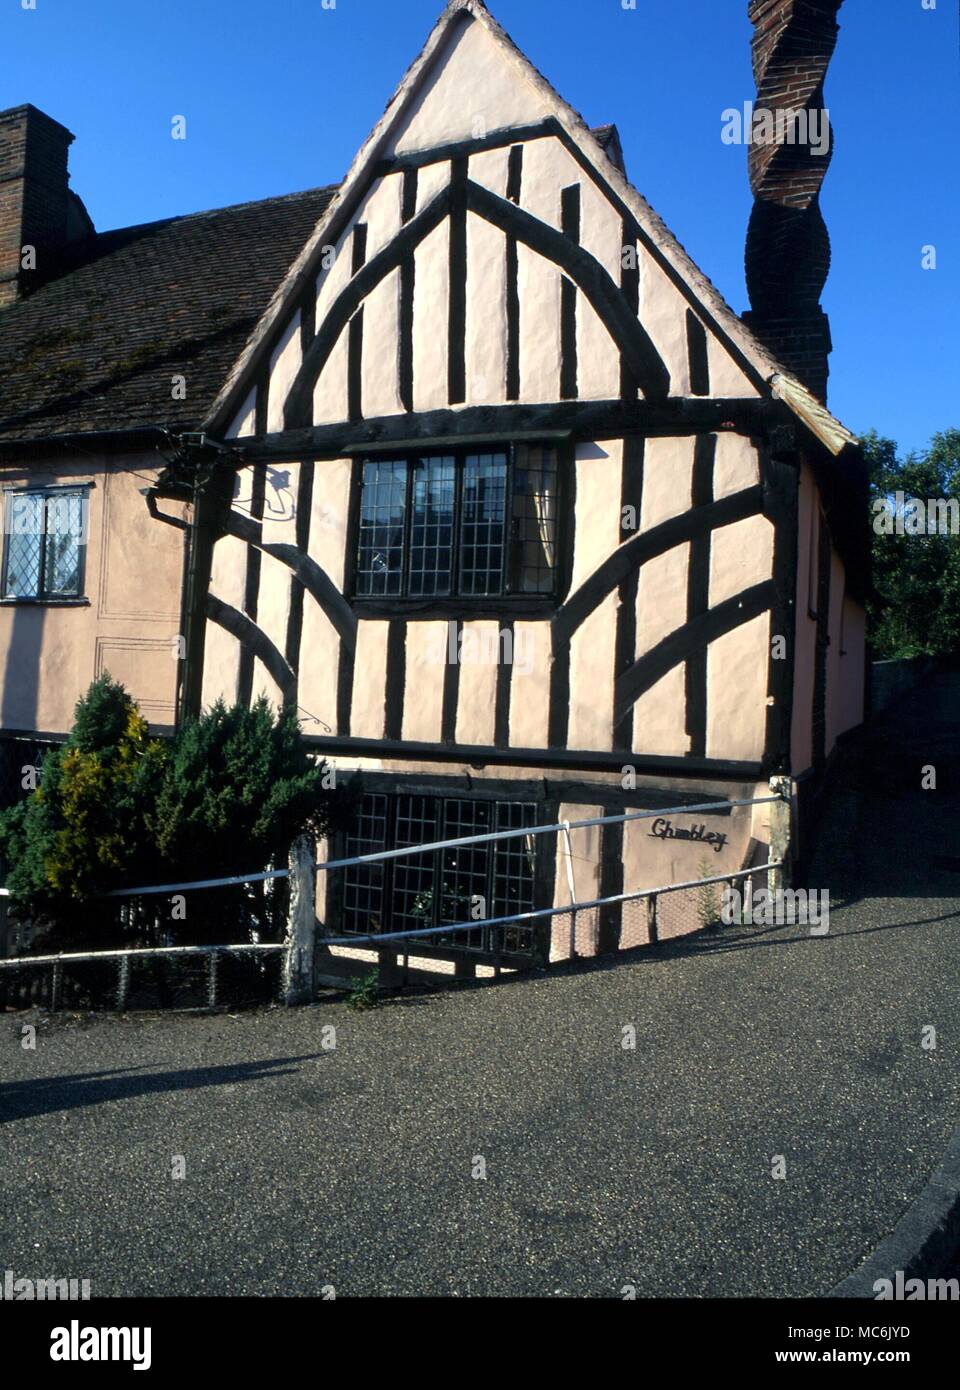 WITCHCRAFT - SUDBURY Medieval house at Sudbury, one of the centres for the late medieval witchcraft hunts Stock Photo